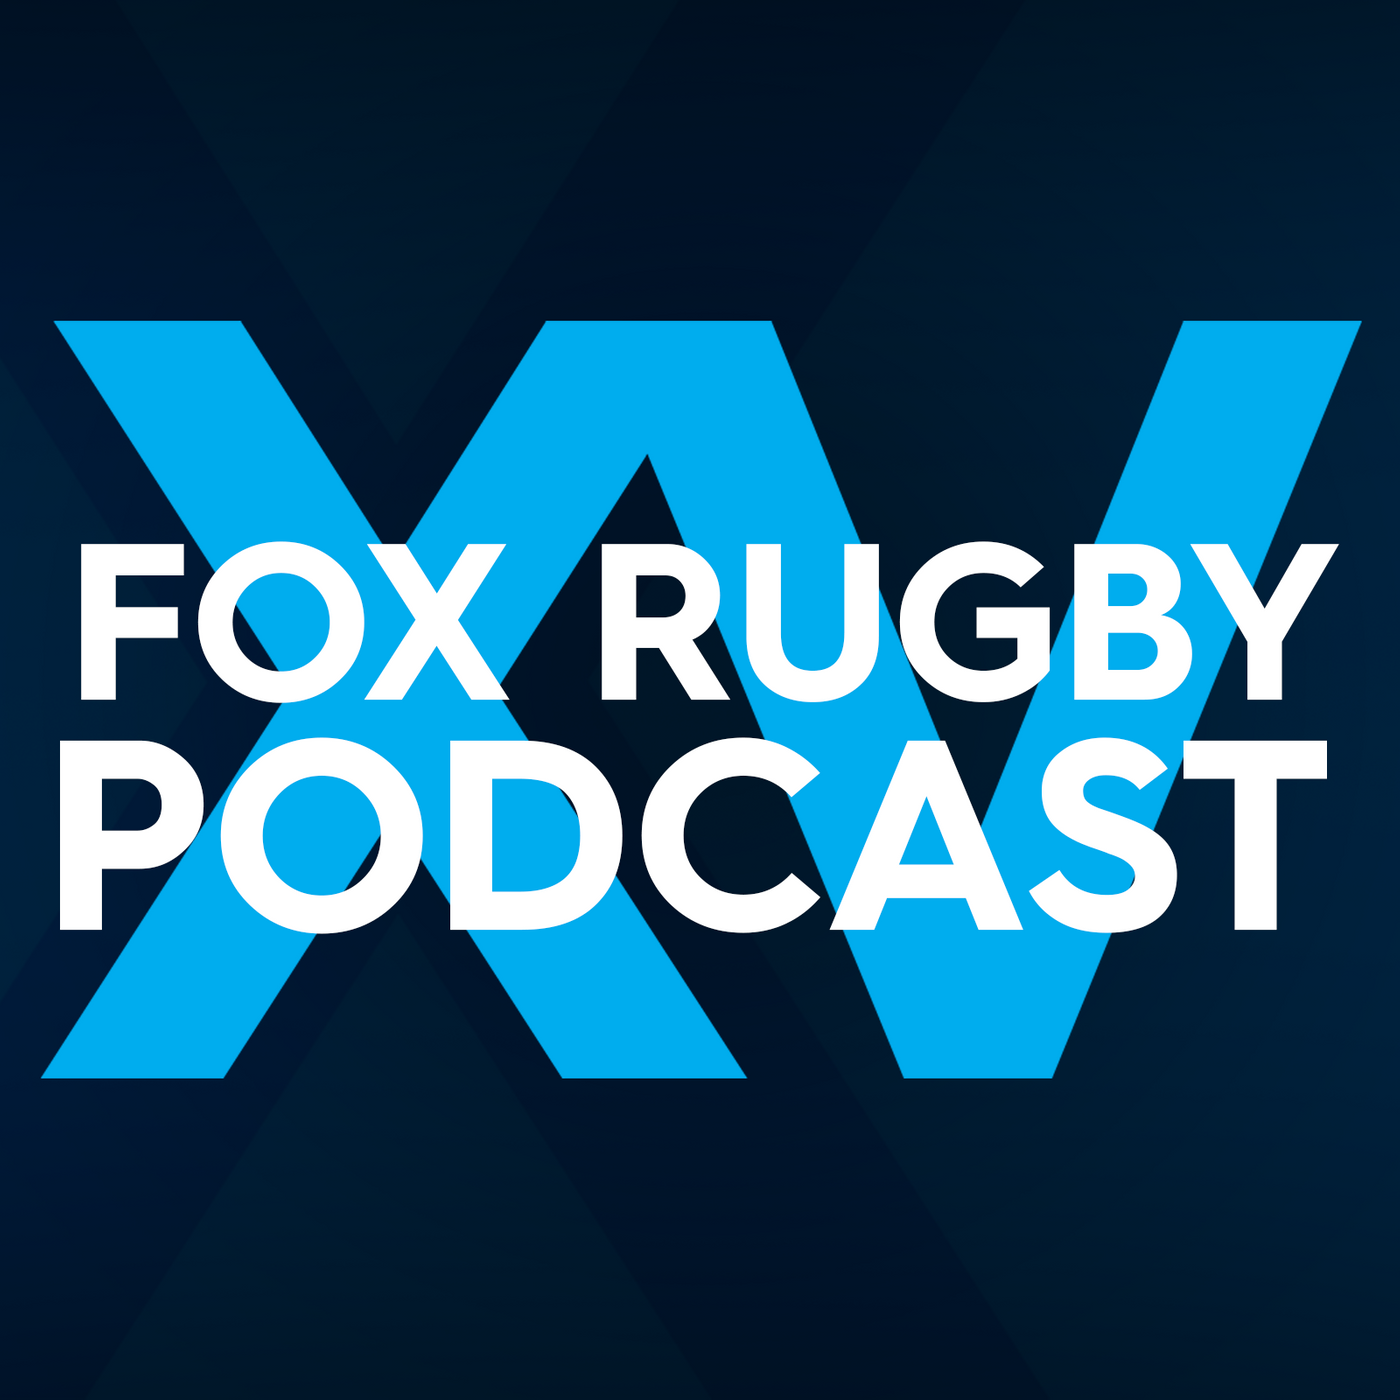 Bledisloe Cup first Test preview